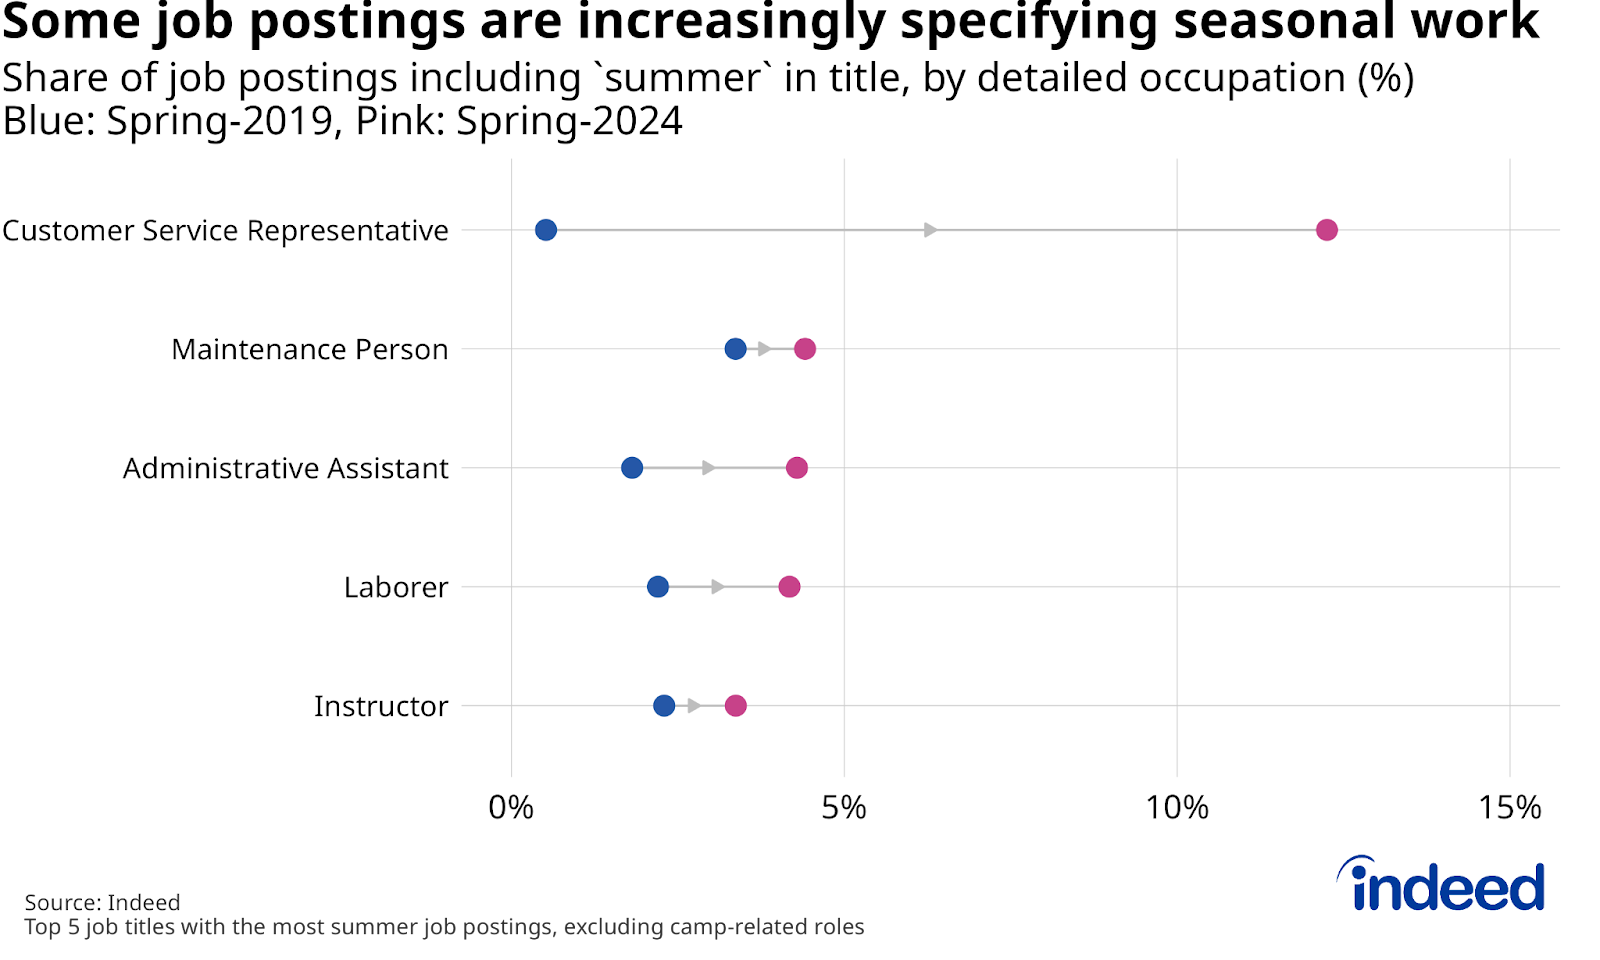 Lollipop graph titled “Some job postings are increasingly specifying seasonal work” shows the share of job postings including summer in the title for spring 2019 and spring 2024. The summer-share of postings rose between 2019 and 2024 for several occupations, including customer service representatives, maintenance persons, and administrative assistants.